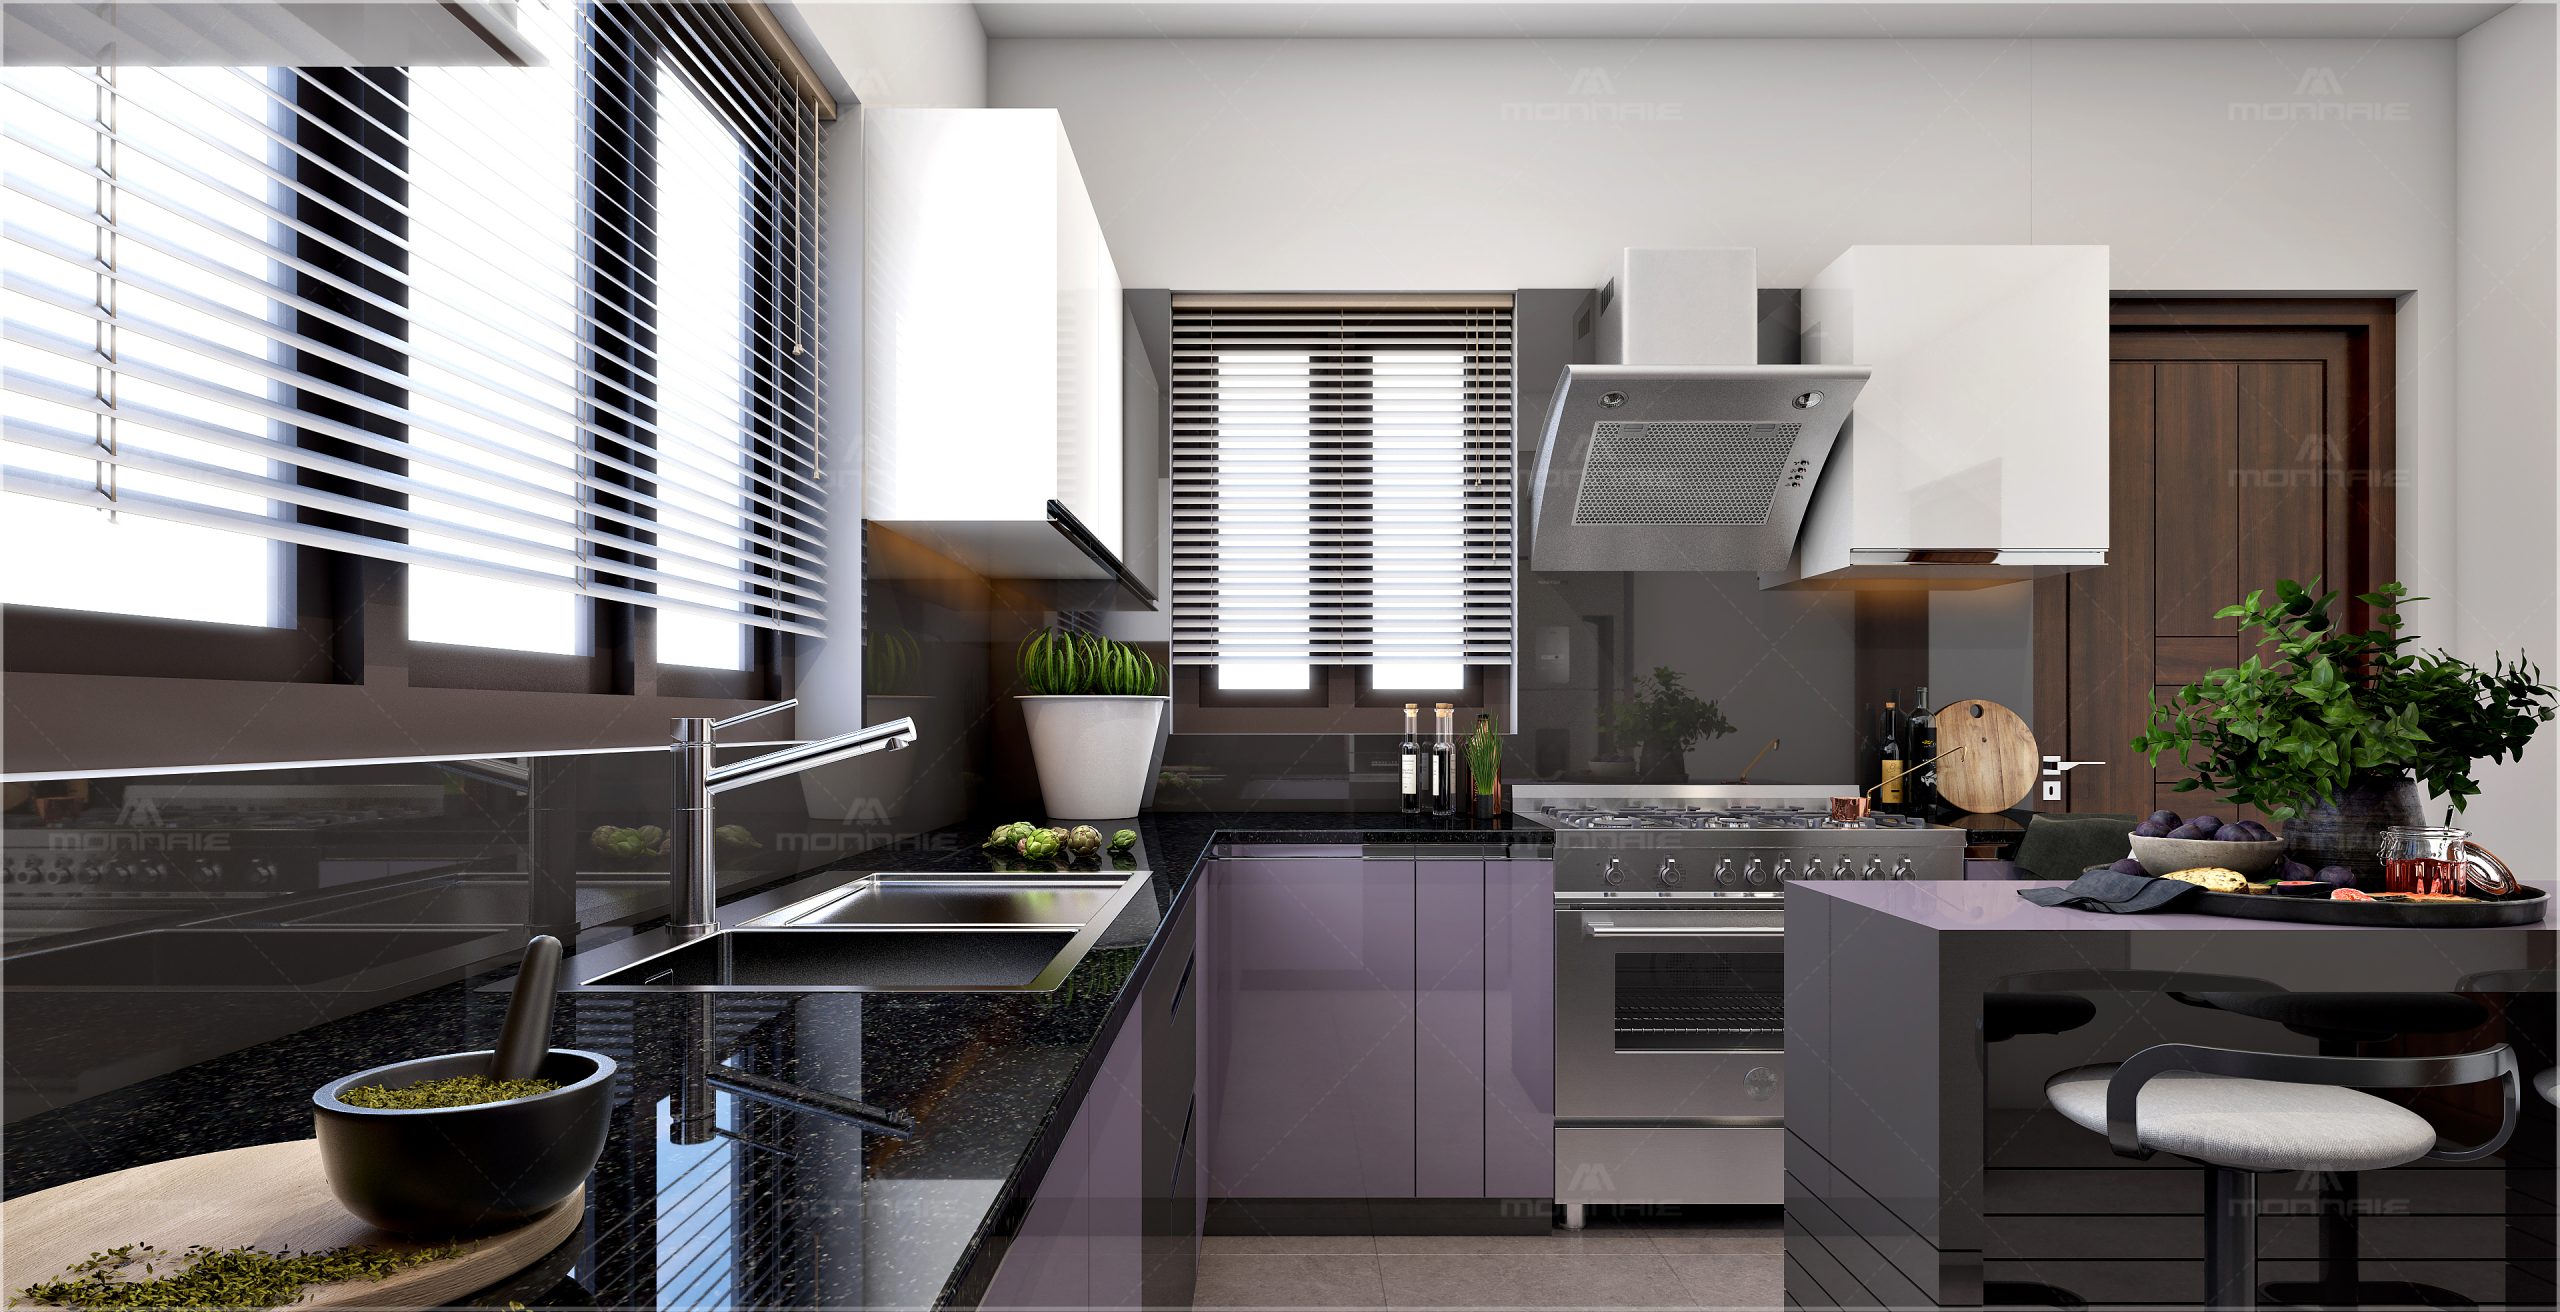 kitchen design concepts in kerala